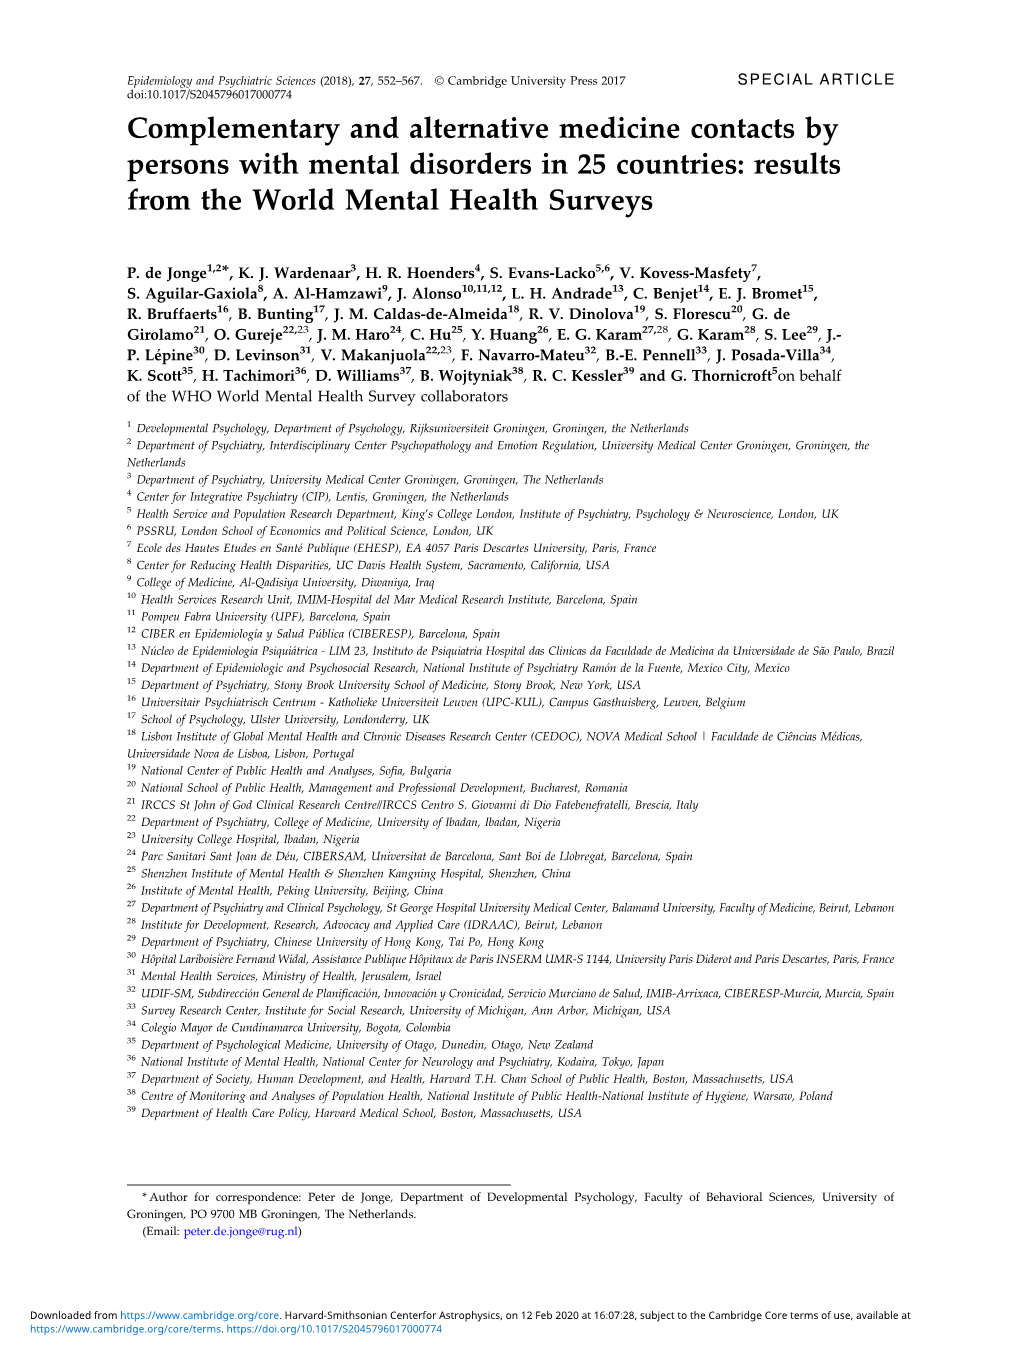 Complementary and Alternative Medicine Contacts by Persons with Mental Disorders in 25 Countries: Results from the World Mental Health Surveys